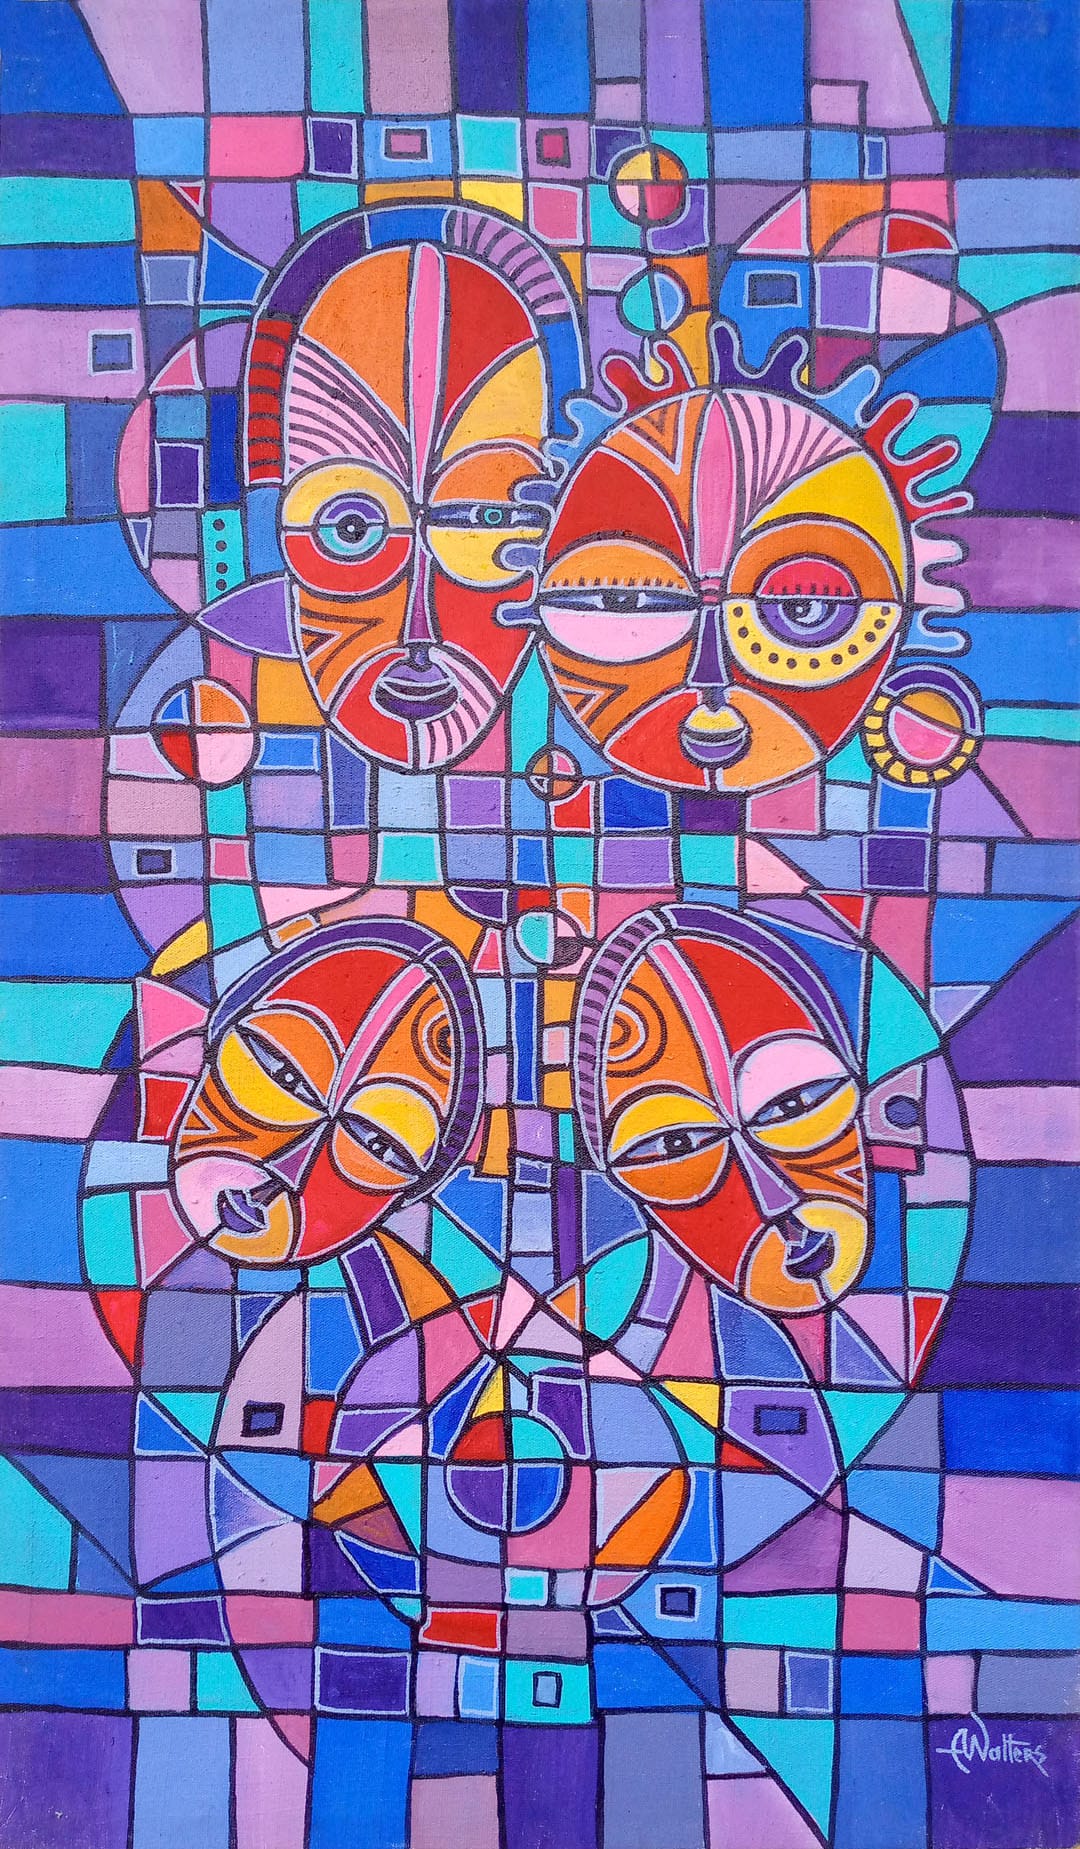 From Africa, it's a portrait of a family in crisp acrylic colors. 